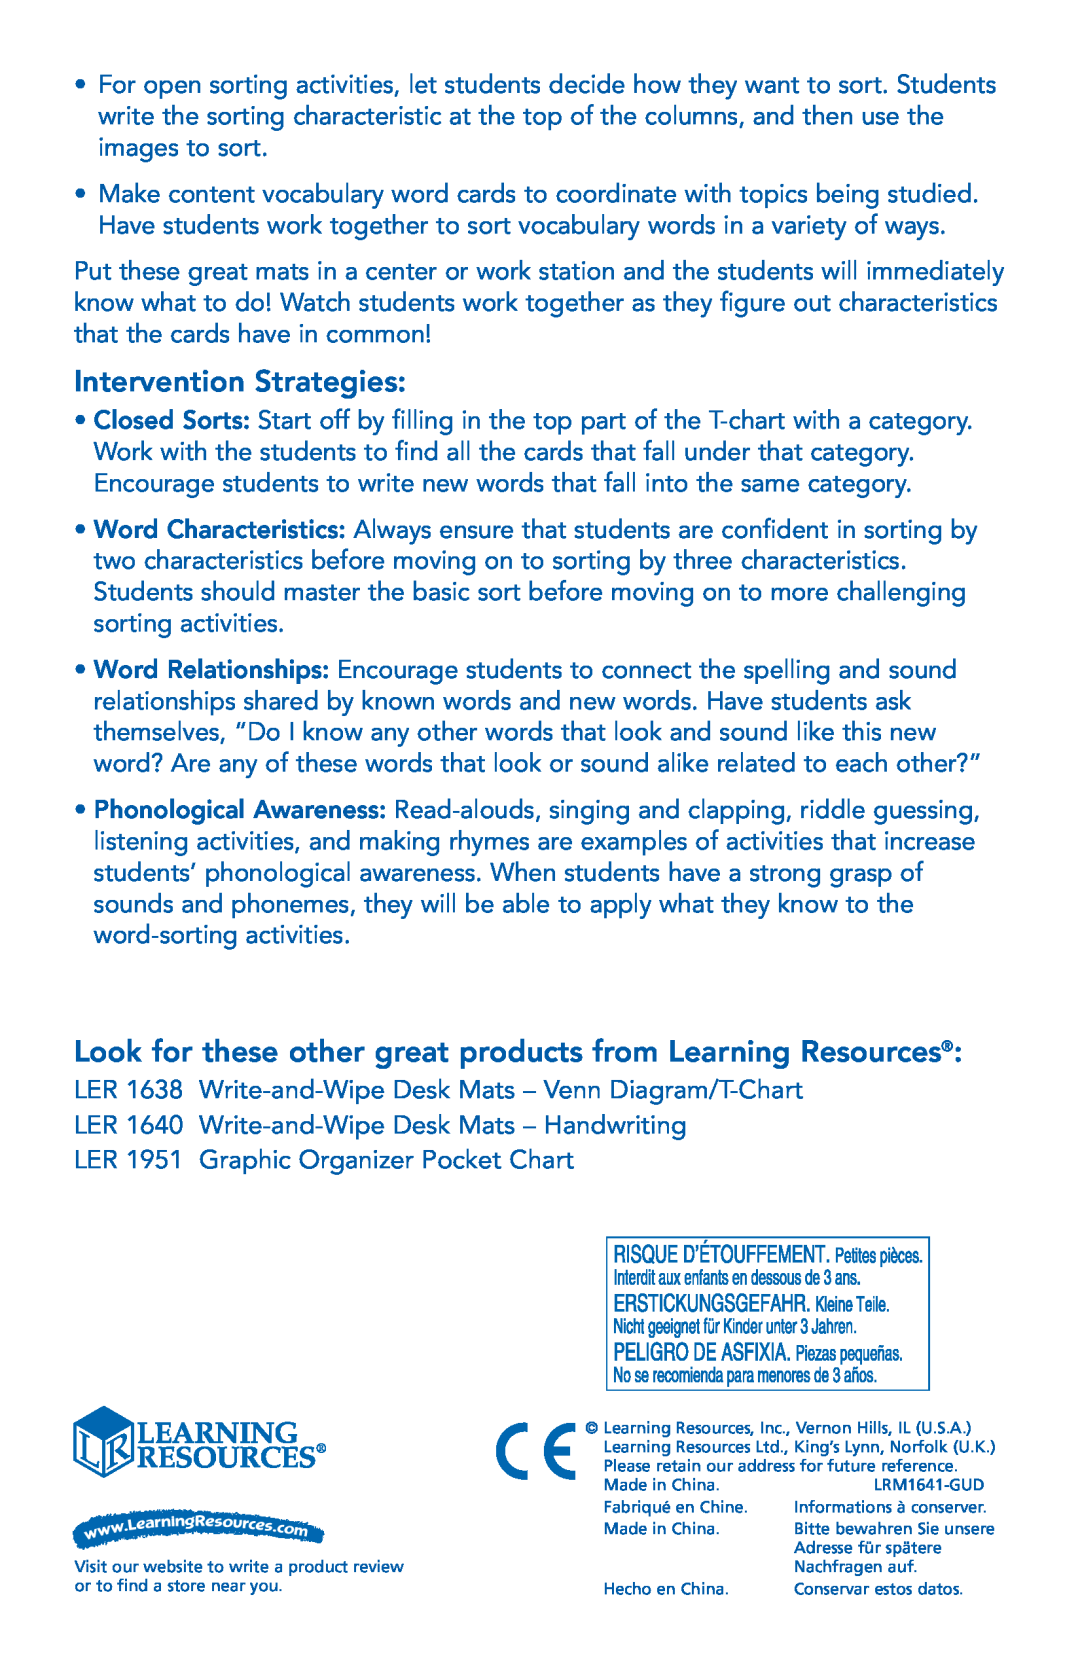 Learning Resources LER 1641 manual Intervention Strategies, Look for these other great products from Learning Resources 